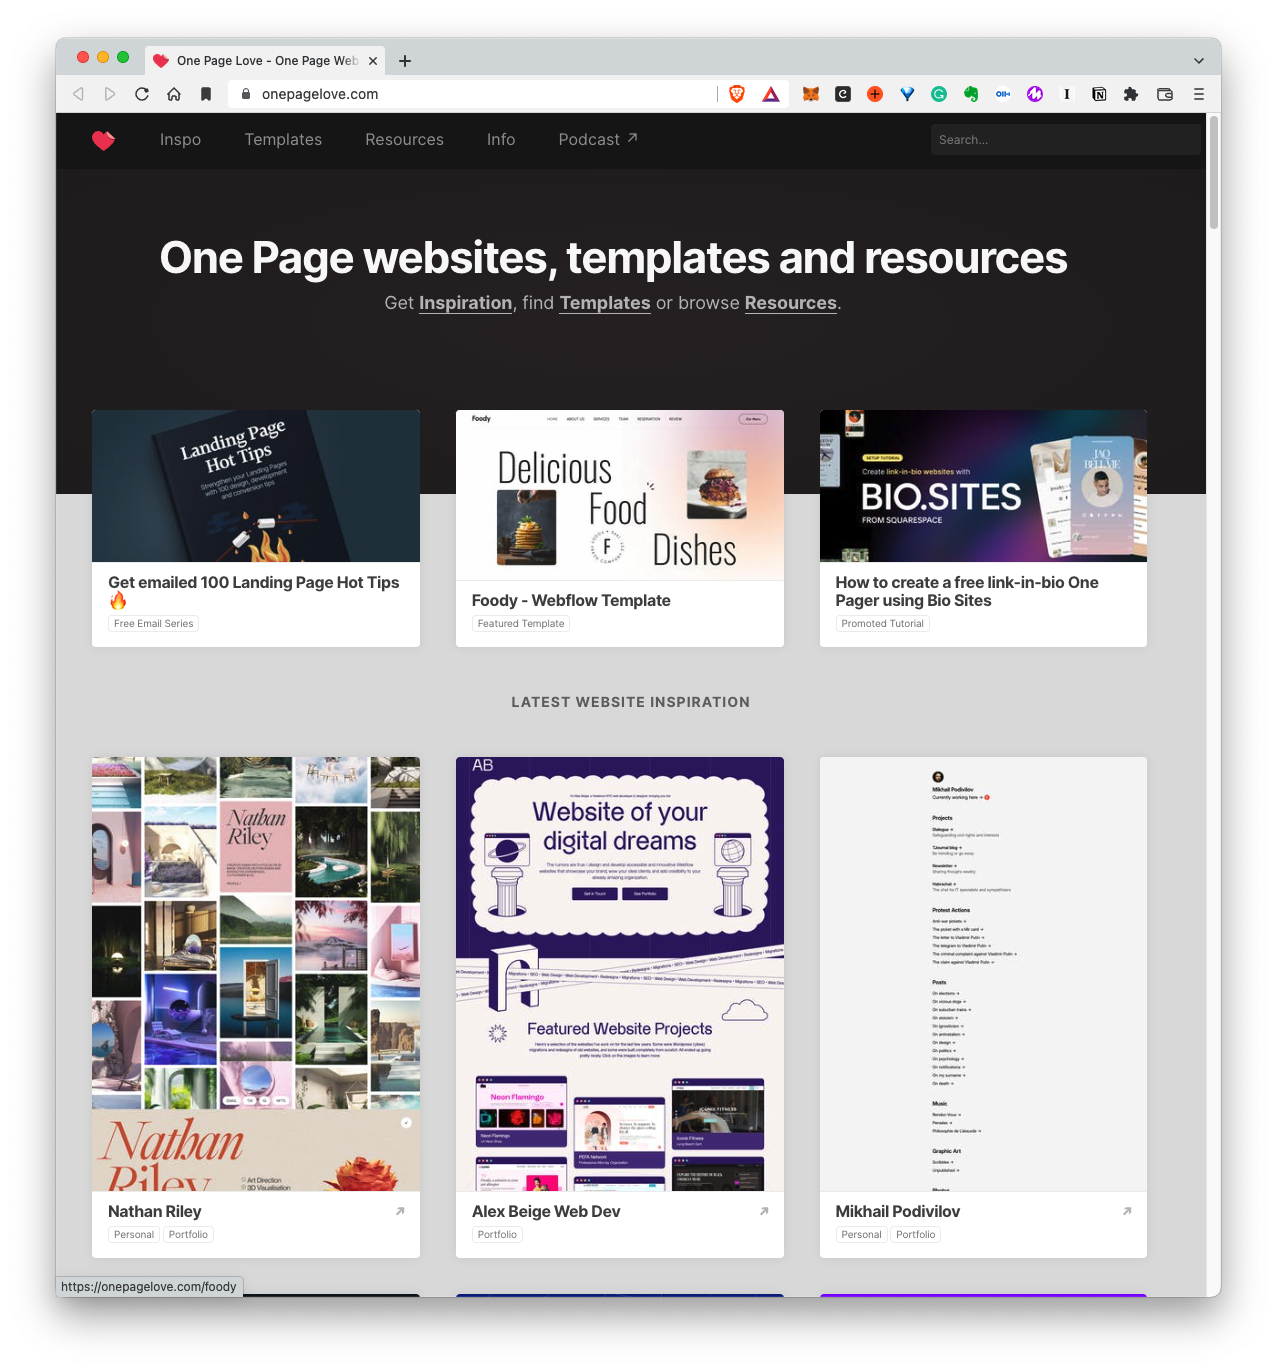 OnePageLove: One Page websites, templates and resources.